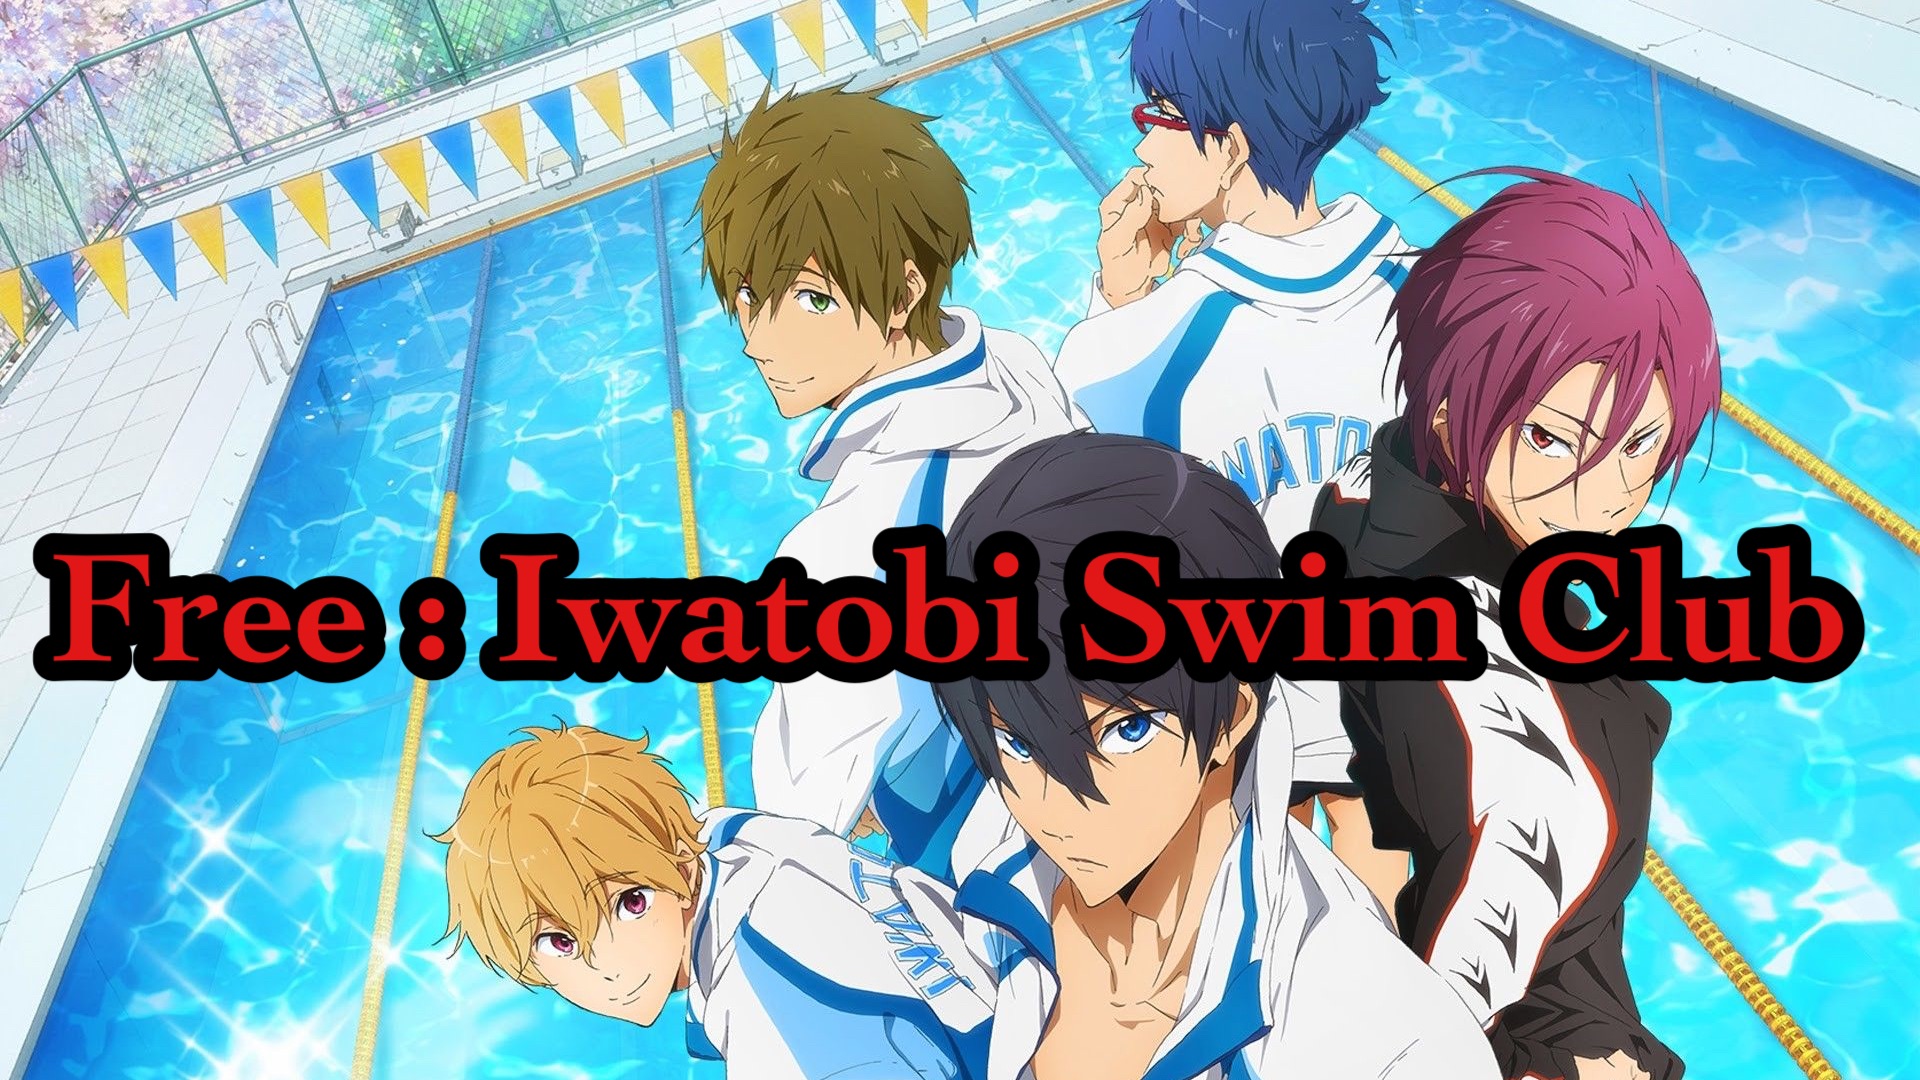 Iwatobi Swim Club Pins and Buttons for Sale  Redbubble